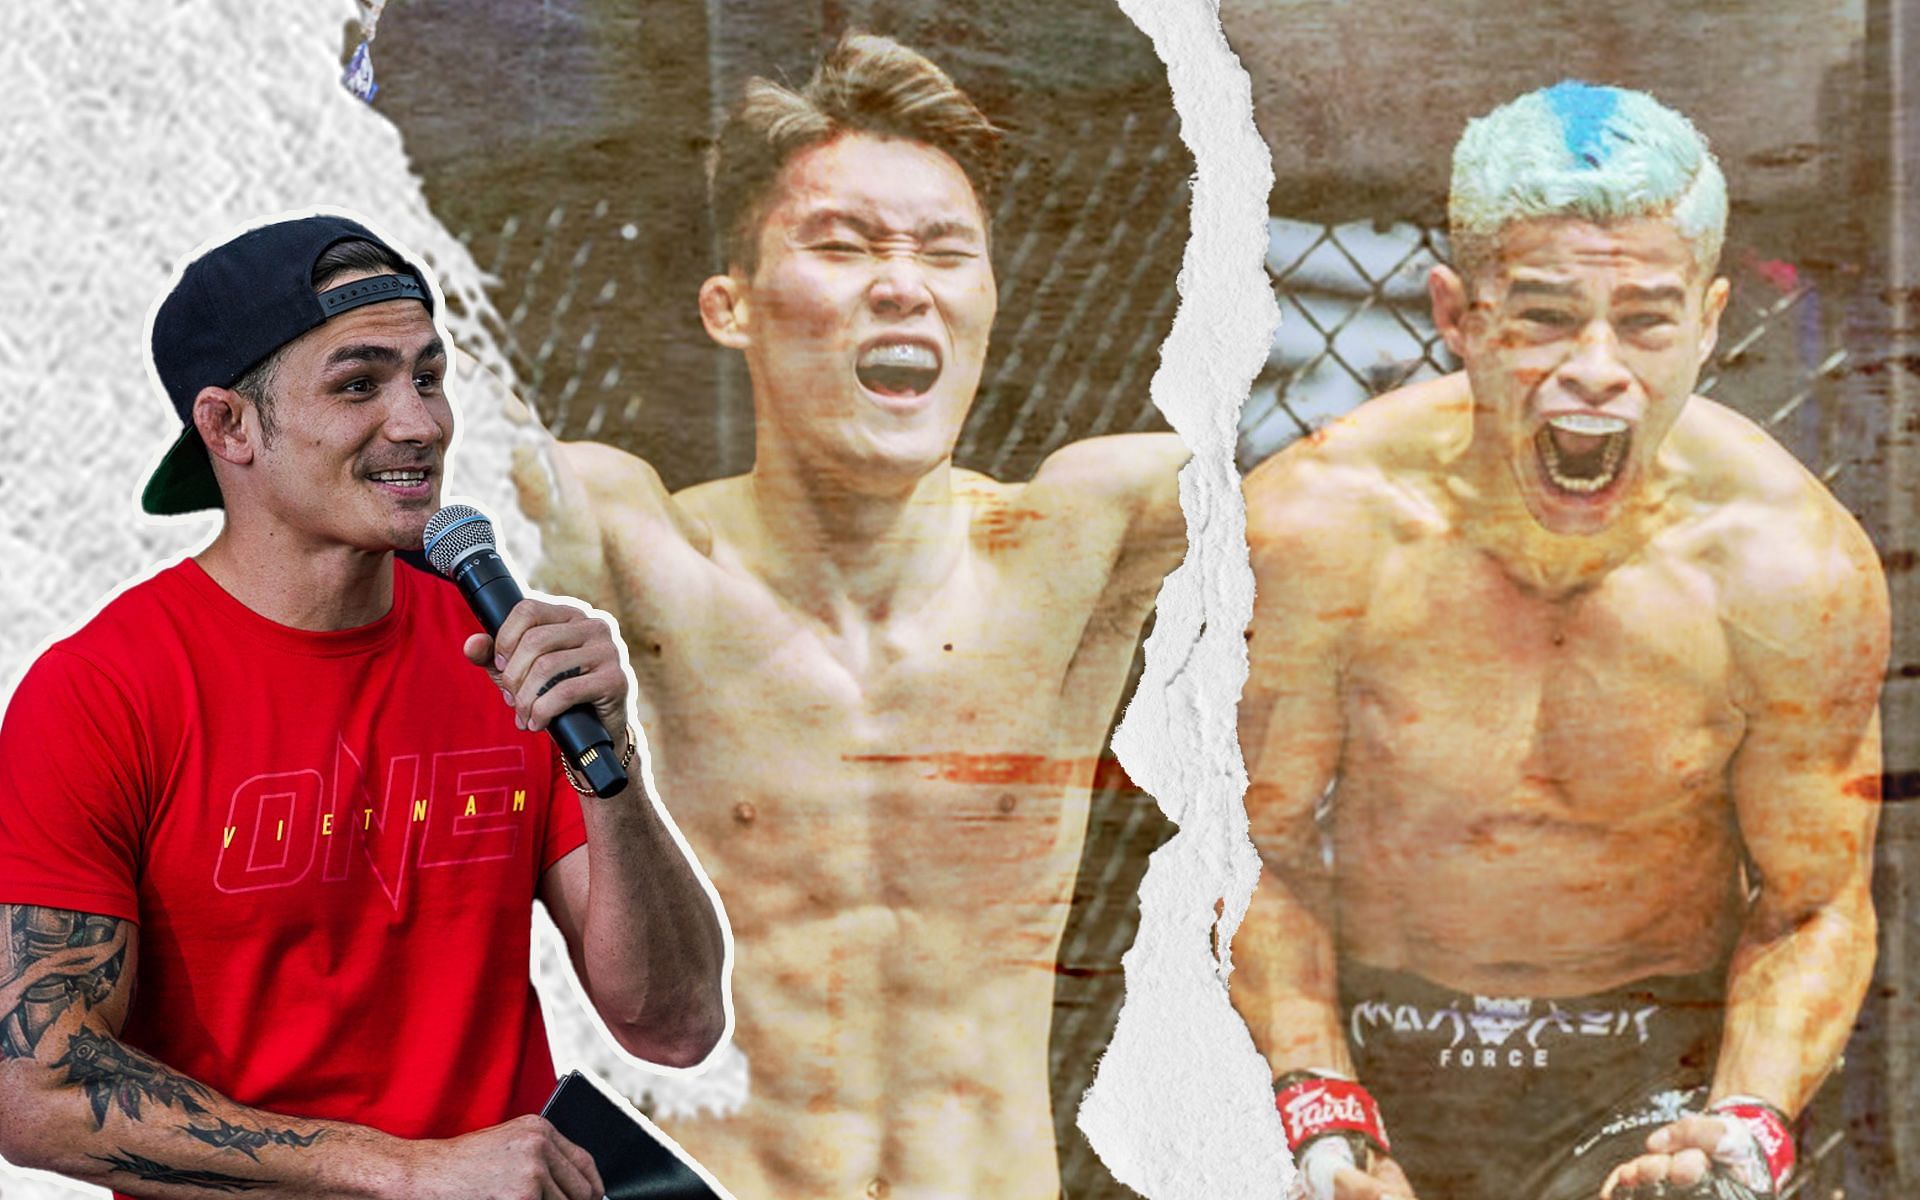 Thanh Le (L) is excited for an explosive battle between Kwon Won Il (C) and Fabricio Andrade (R) at ONE 158. | [Photos: ONE Championship]